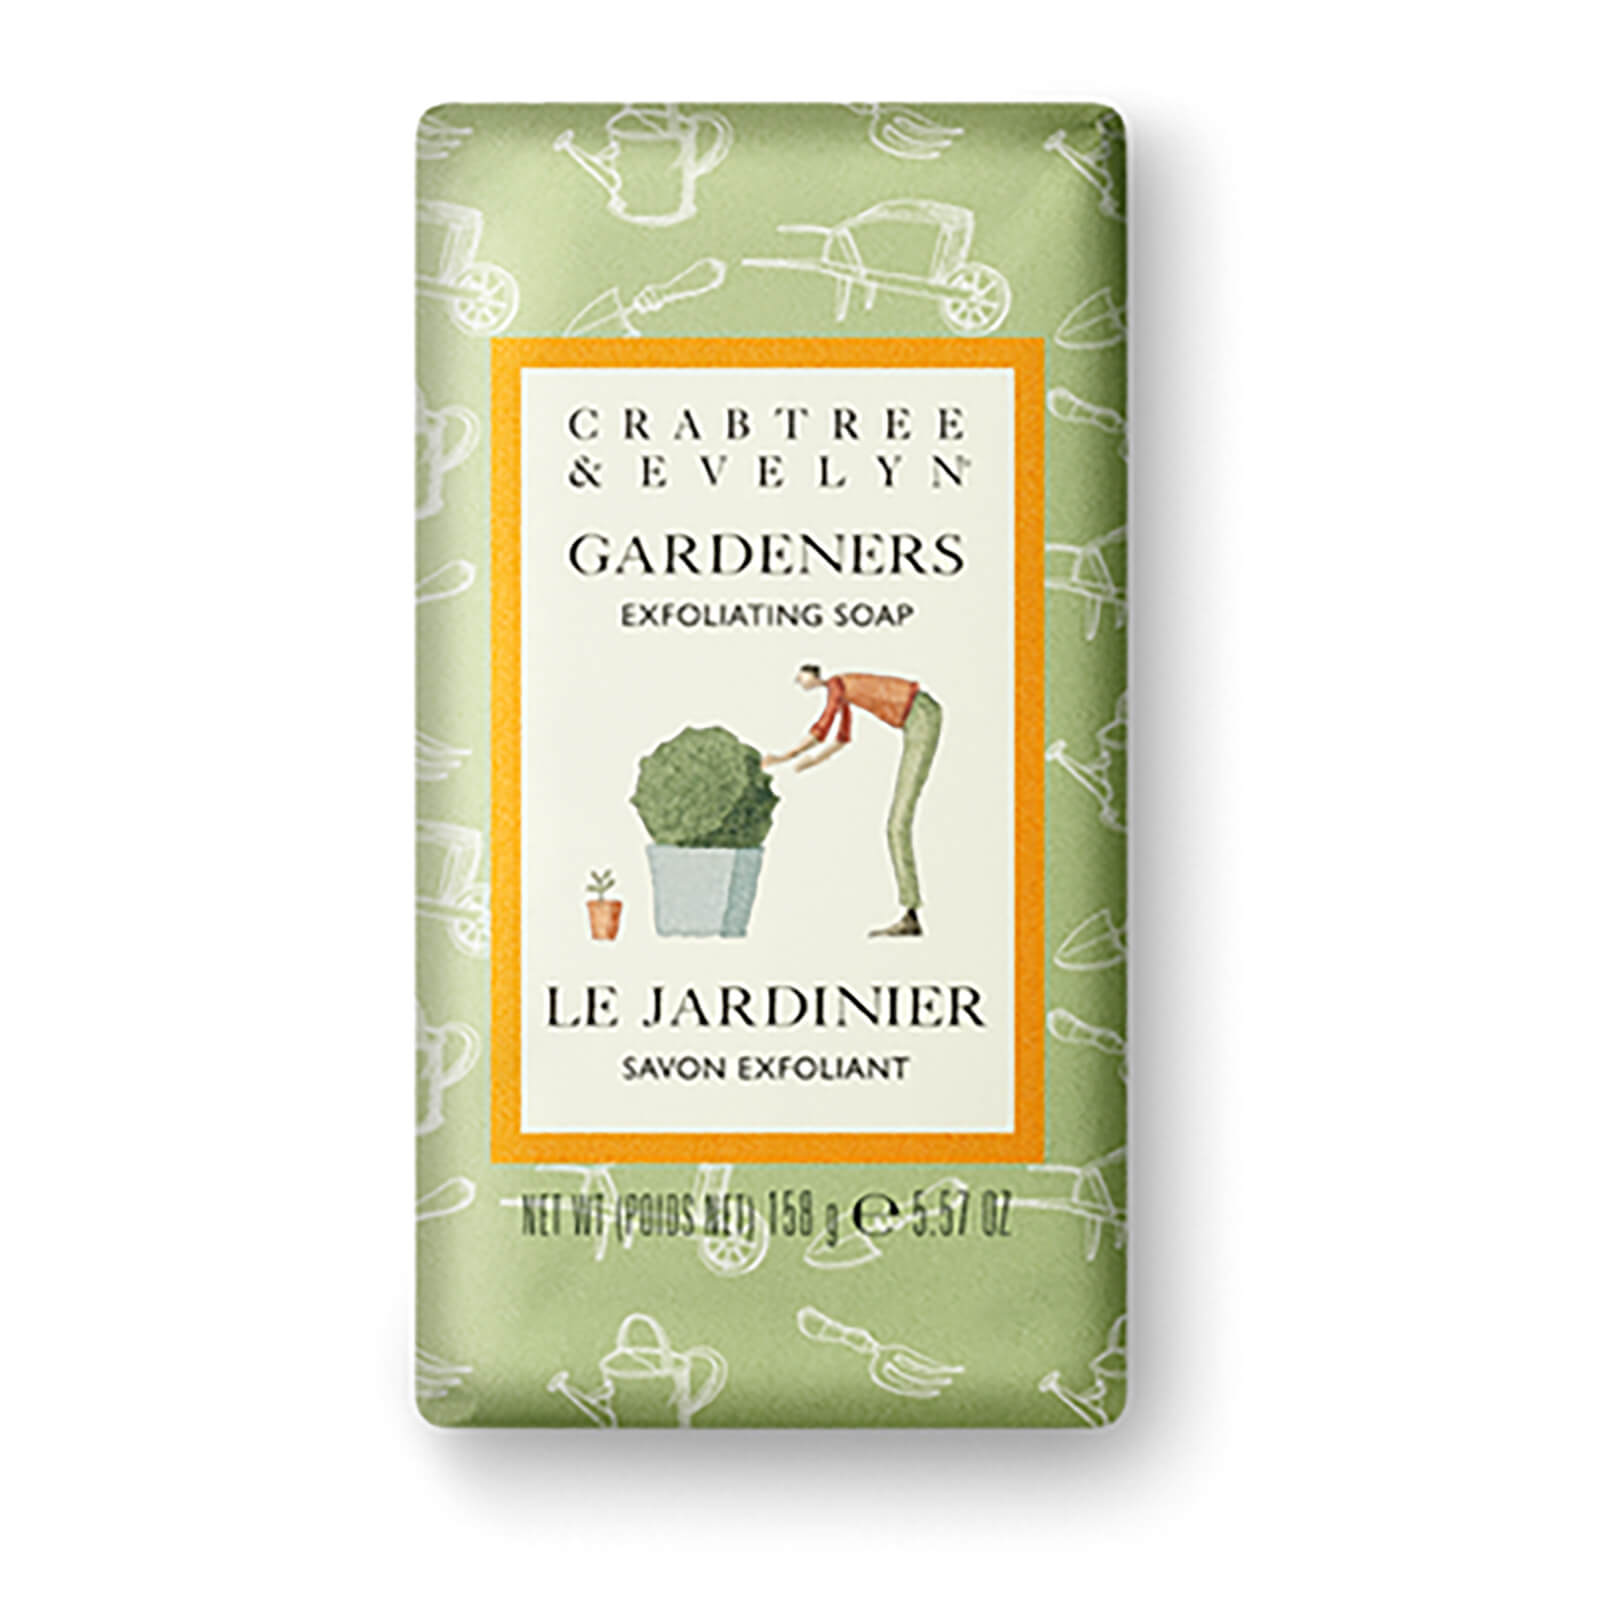 Crabtree & Evelyn Gardeners Exfoliating Soap 158g